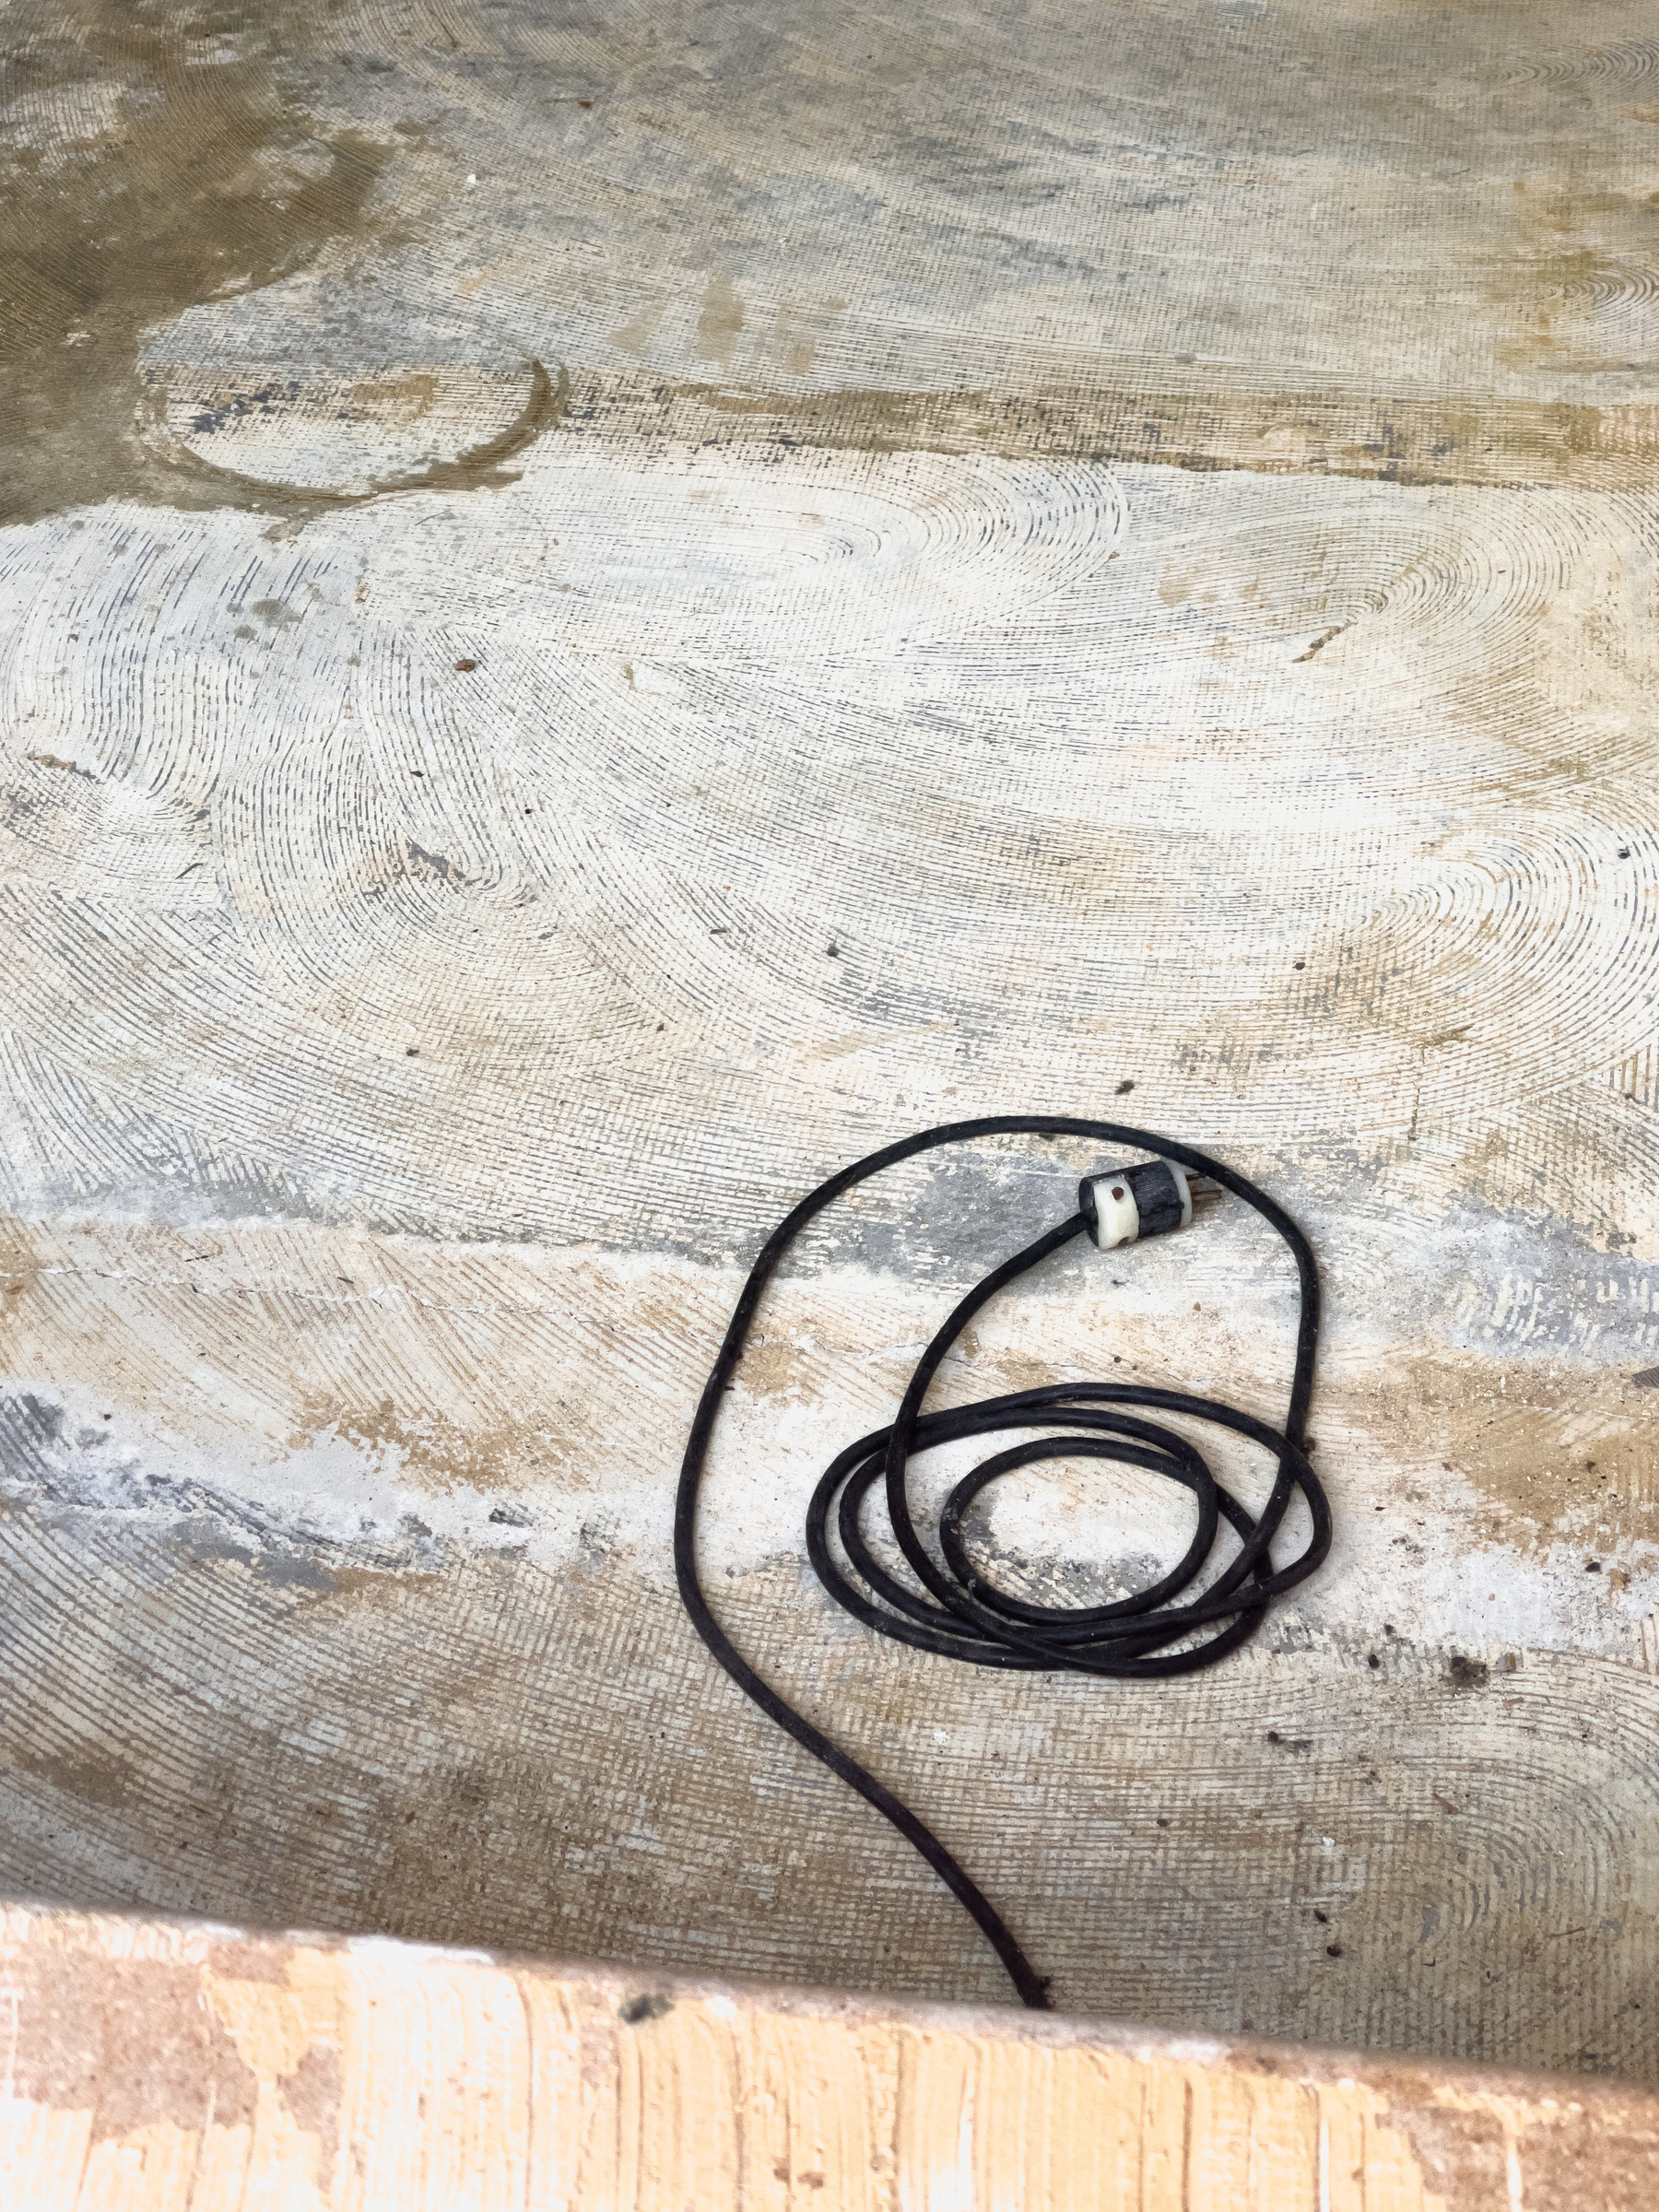 Concrete floor with coiled power cord.